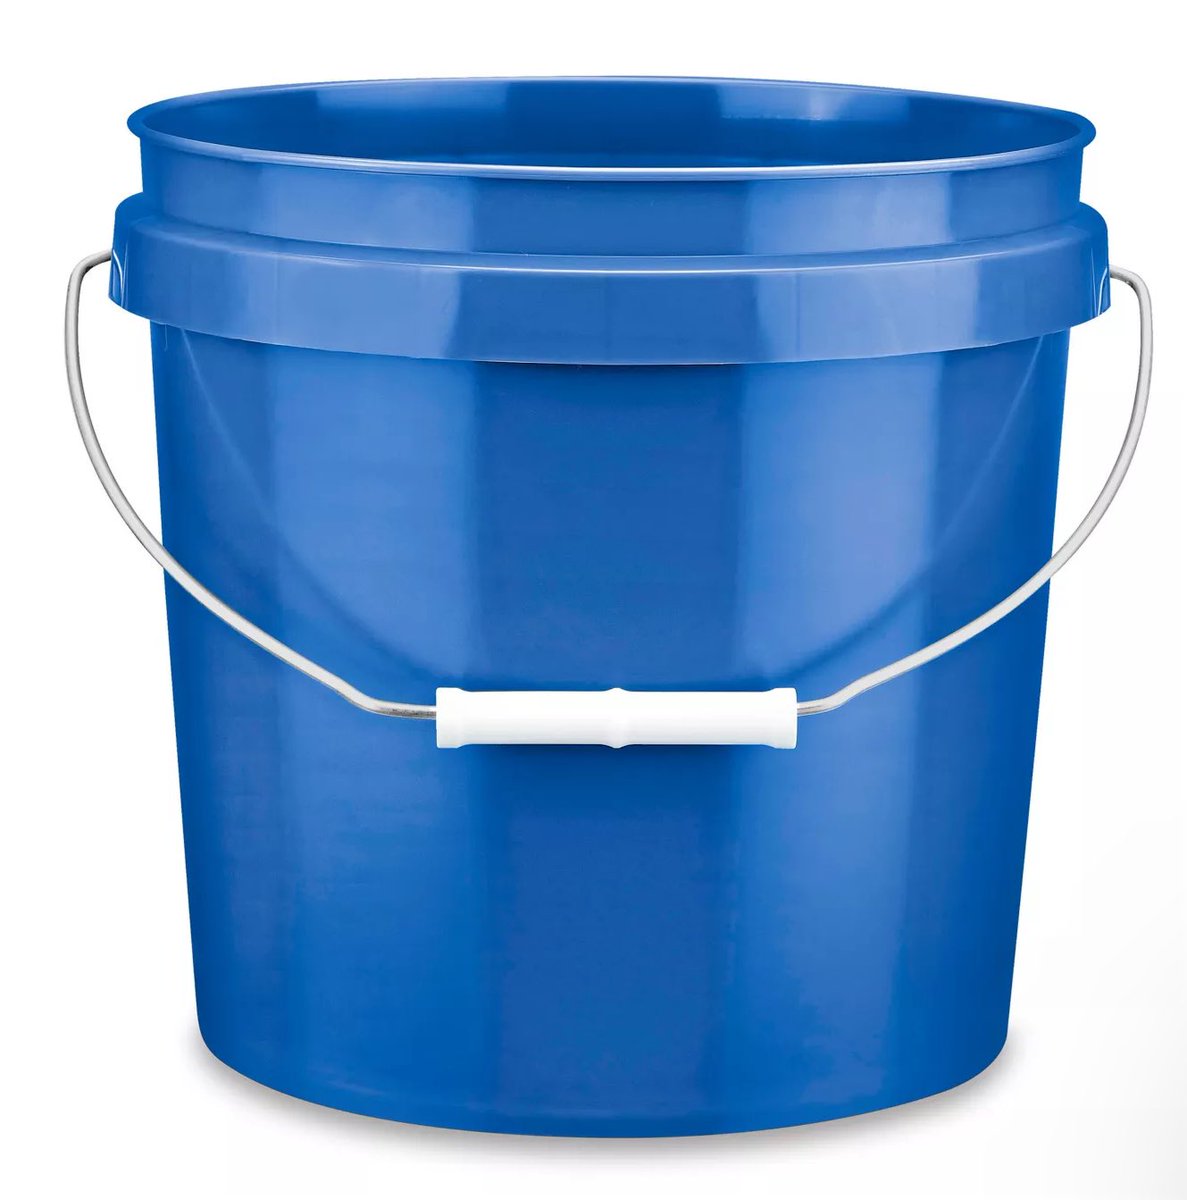 This is not a person, selfie, or a portrait. 

This is a bucket... People are not buckets. 

…Hope I cleared up some confusion.

 #stigmafree #Stigma #stigmakills

Have a nice day :)